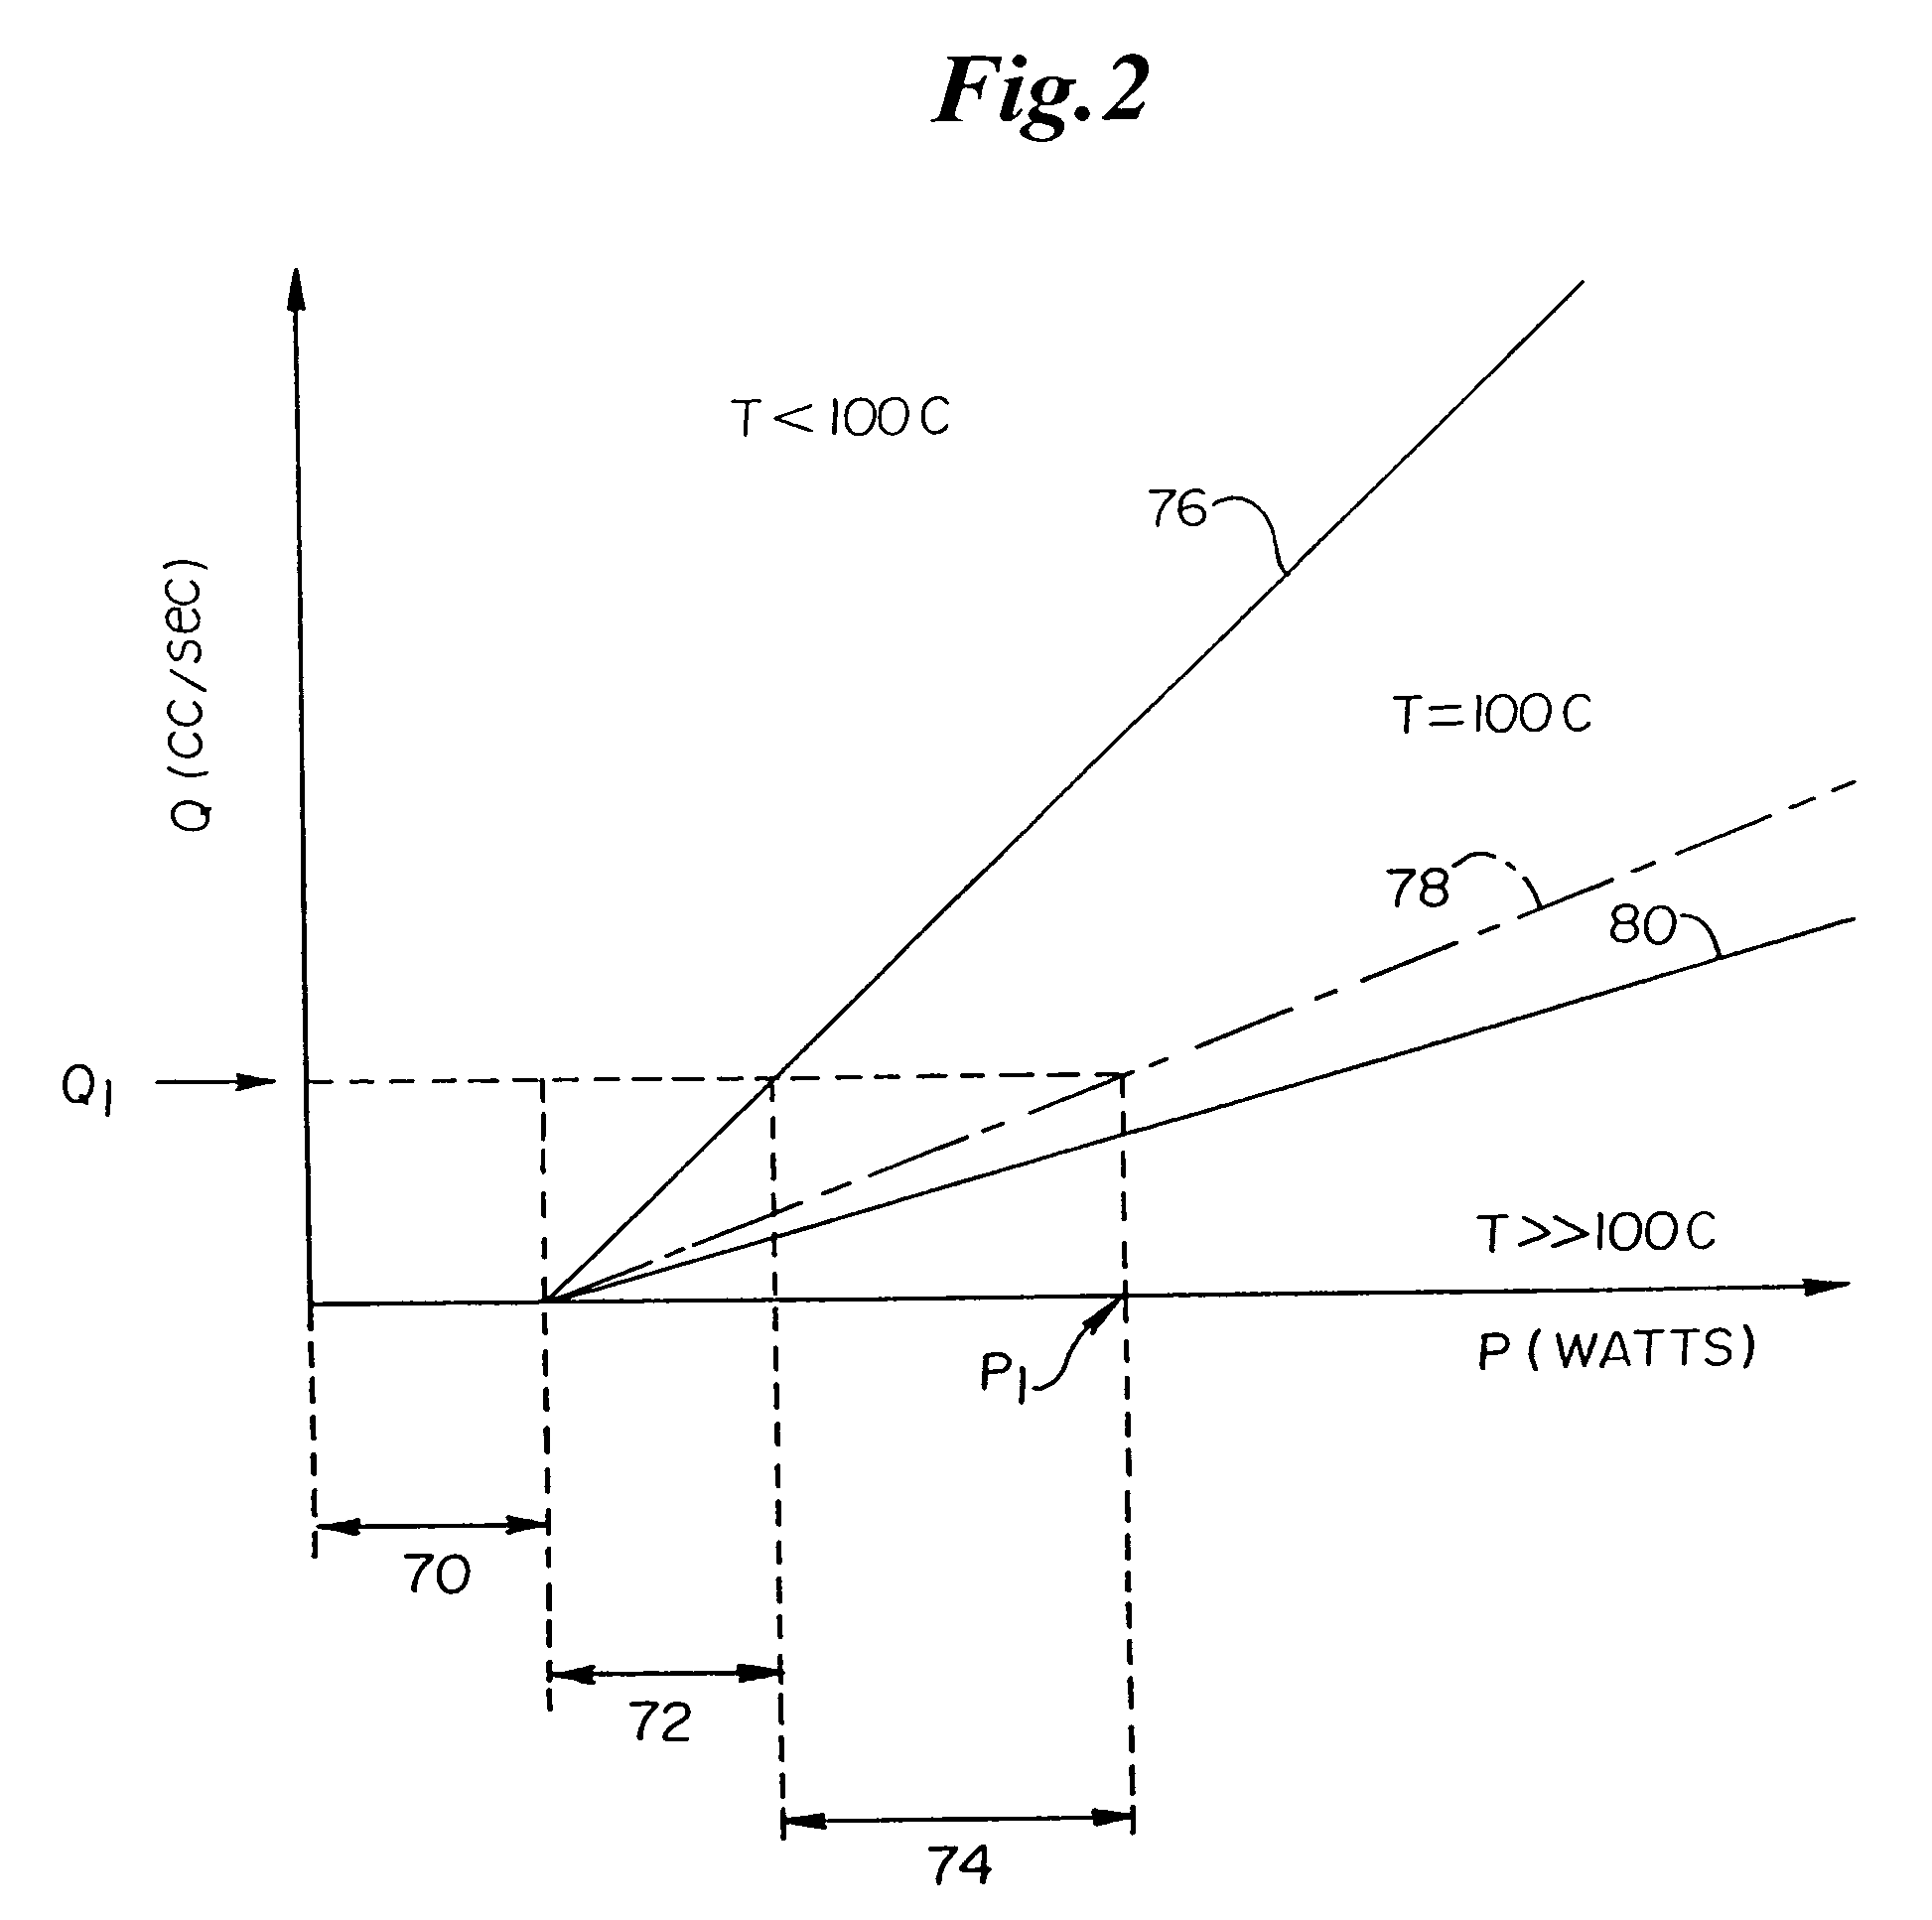 Fluid-assisted medical devices, systems and methods